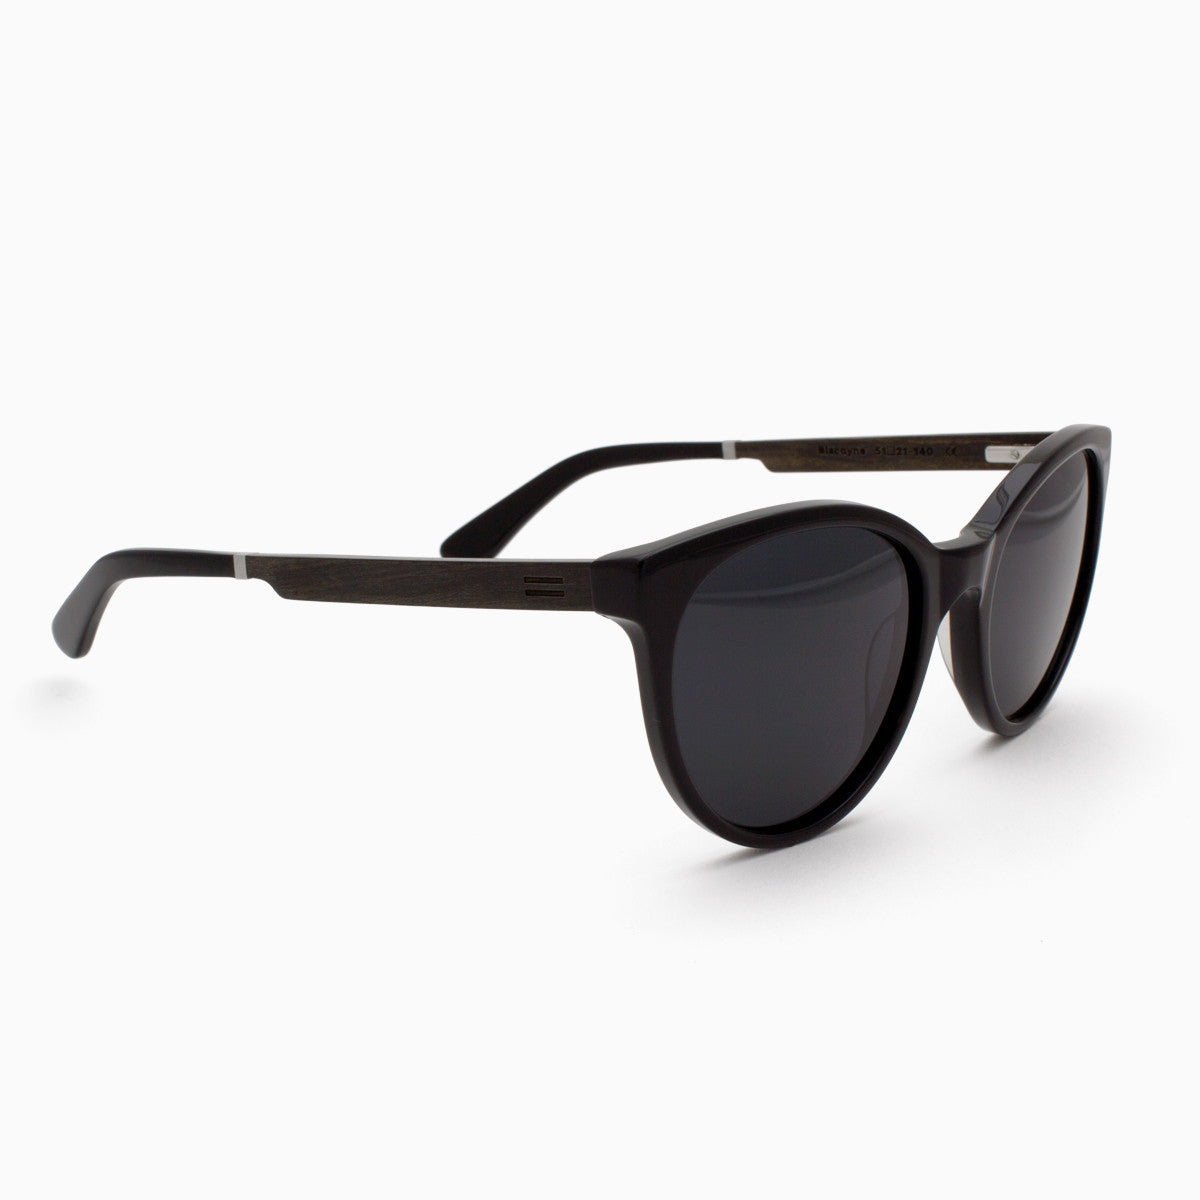 Biscayne Piano Black Acetate and wooden sunglasses